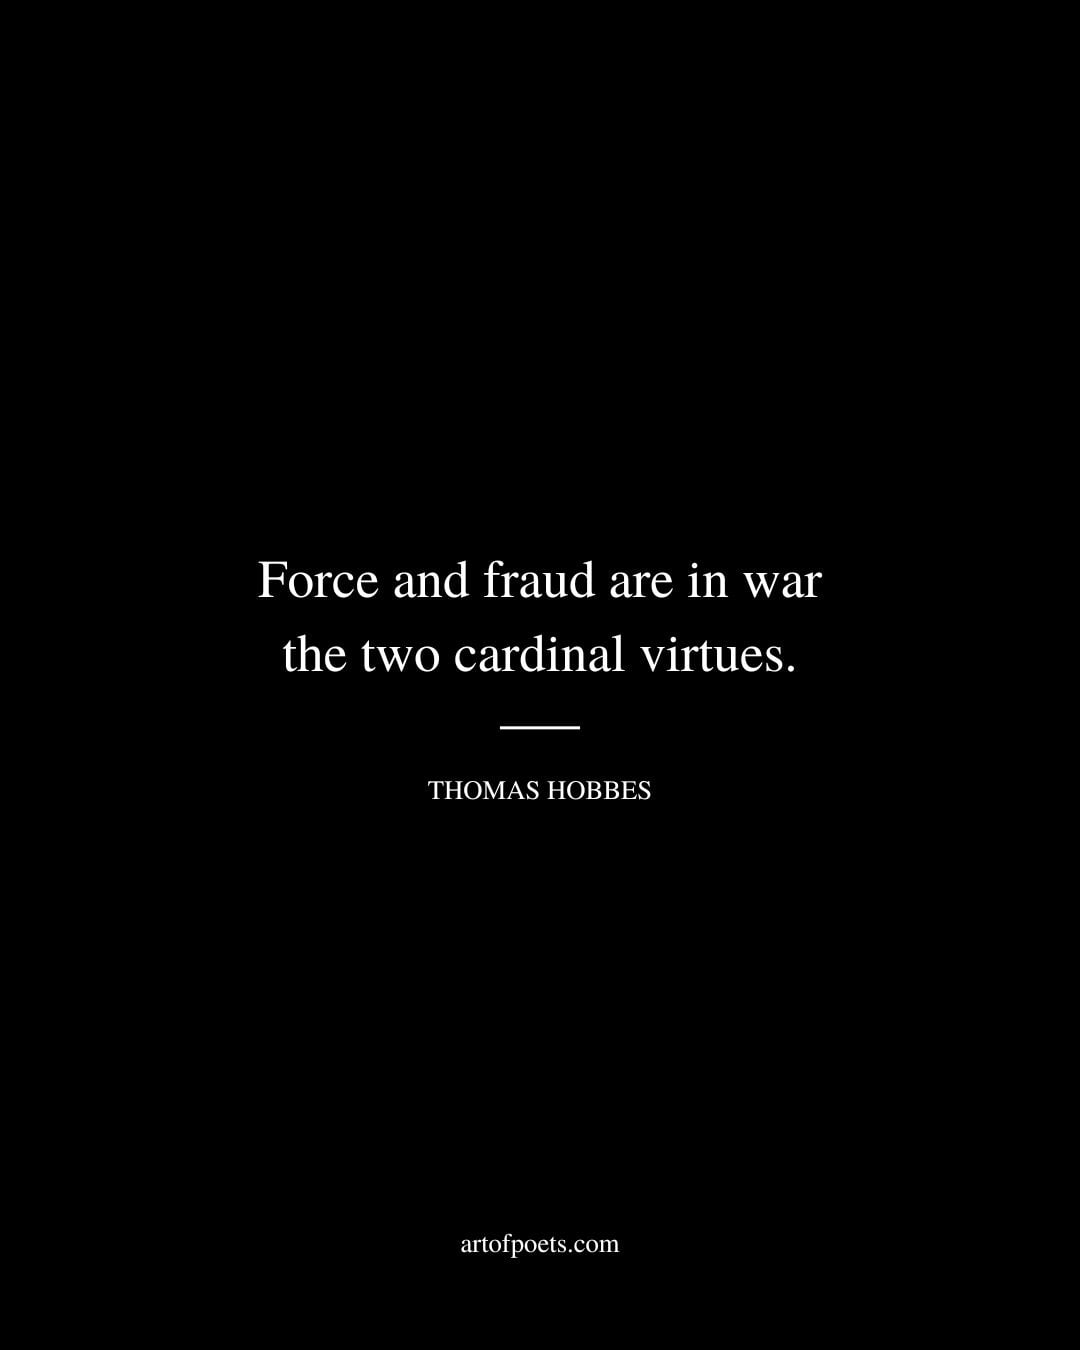 Force and fraud are in war the two cardinal virtues